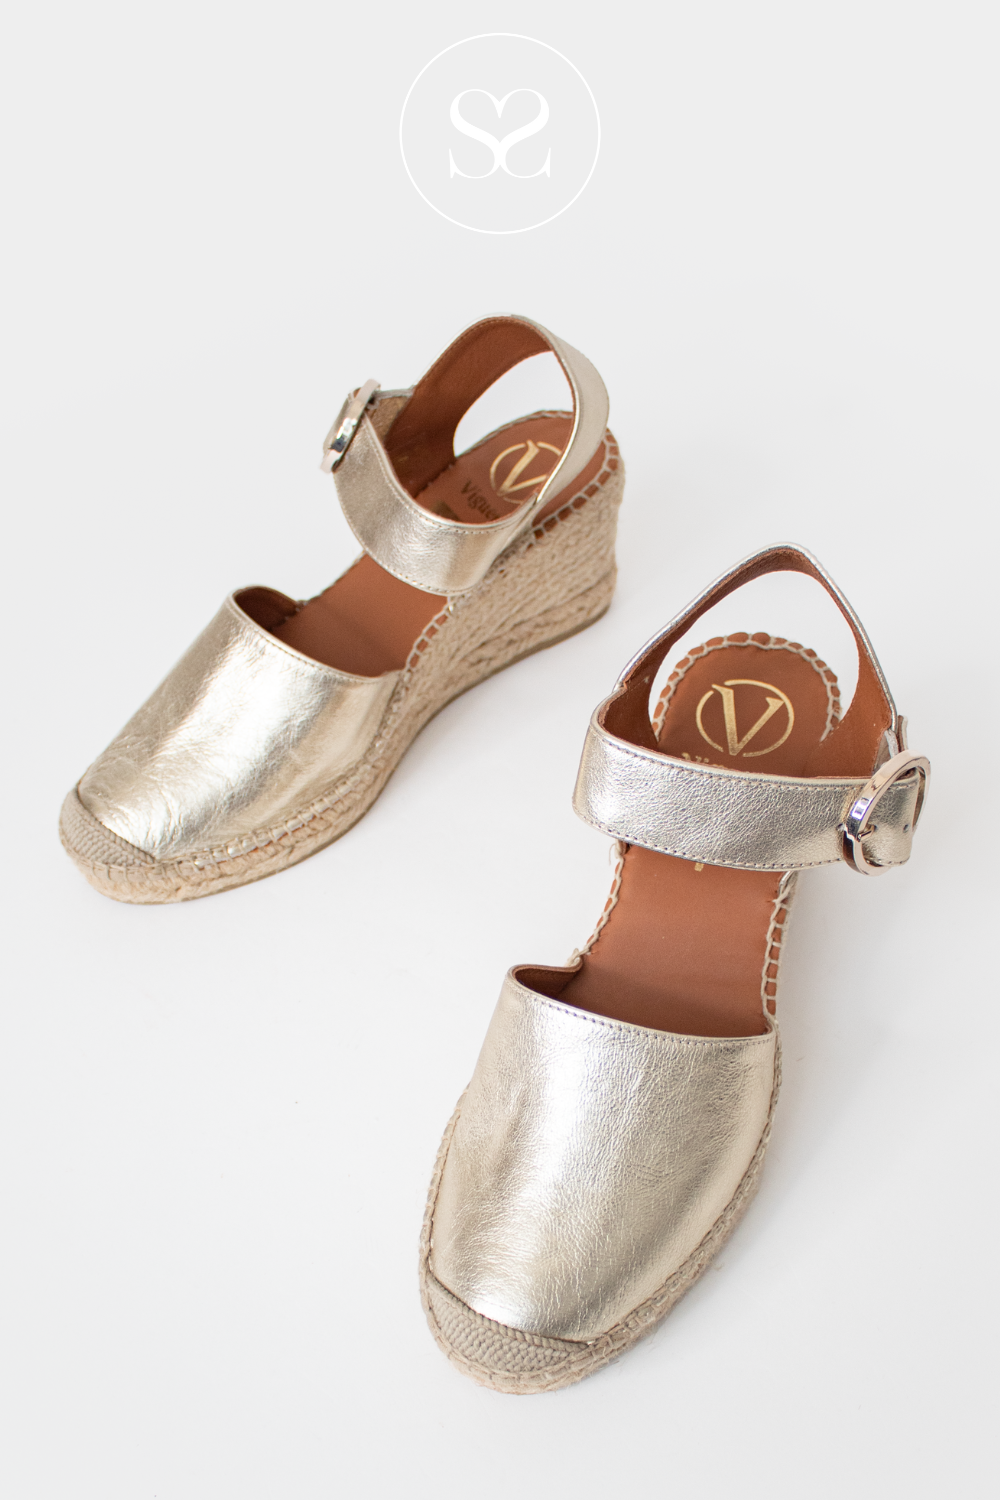 VIGUERA 1922 GOLD WEDGE ESPADRILLE SANDALS WITH CLOSE TOE FRONT AND EXPOSED HEEL. FRONT STRAP WITH BUCKLE DETAIL.